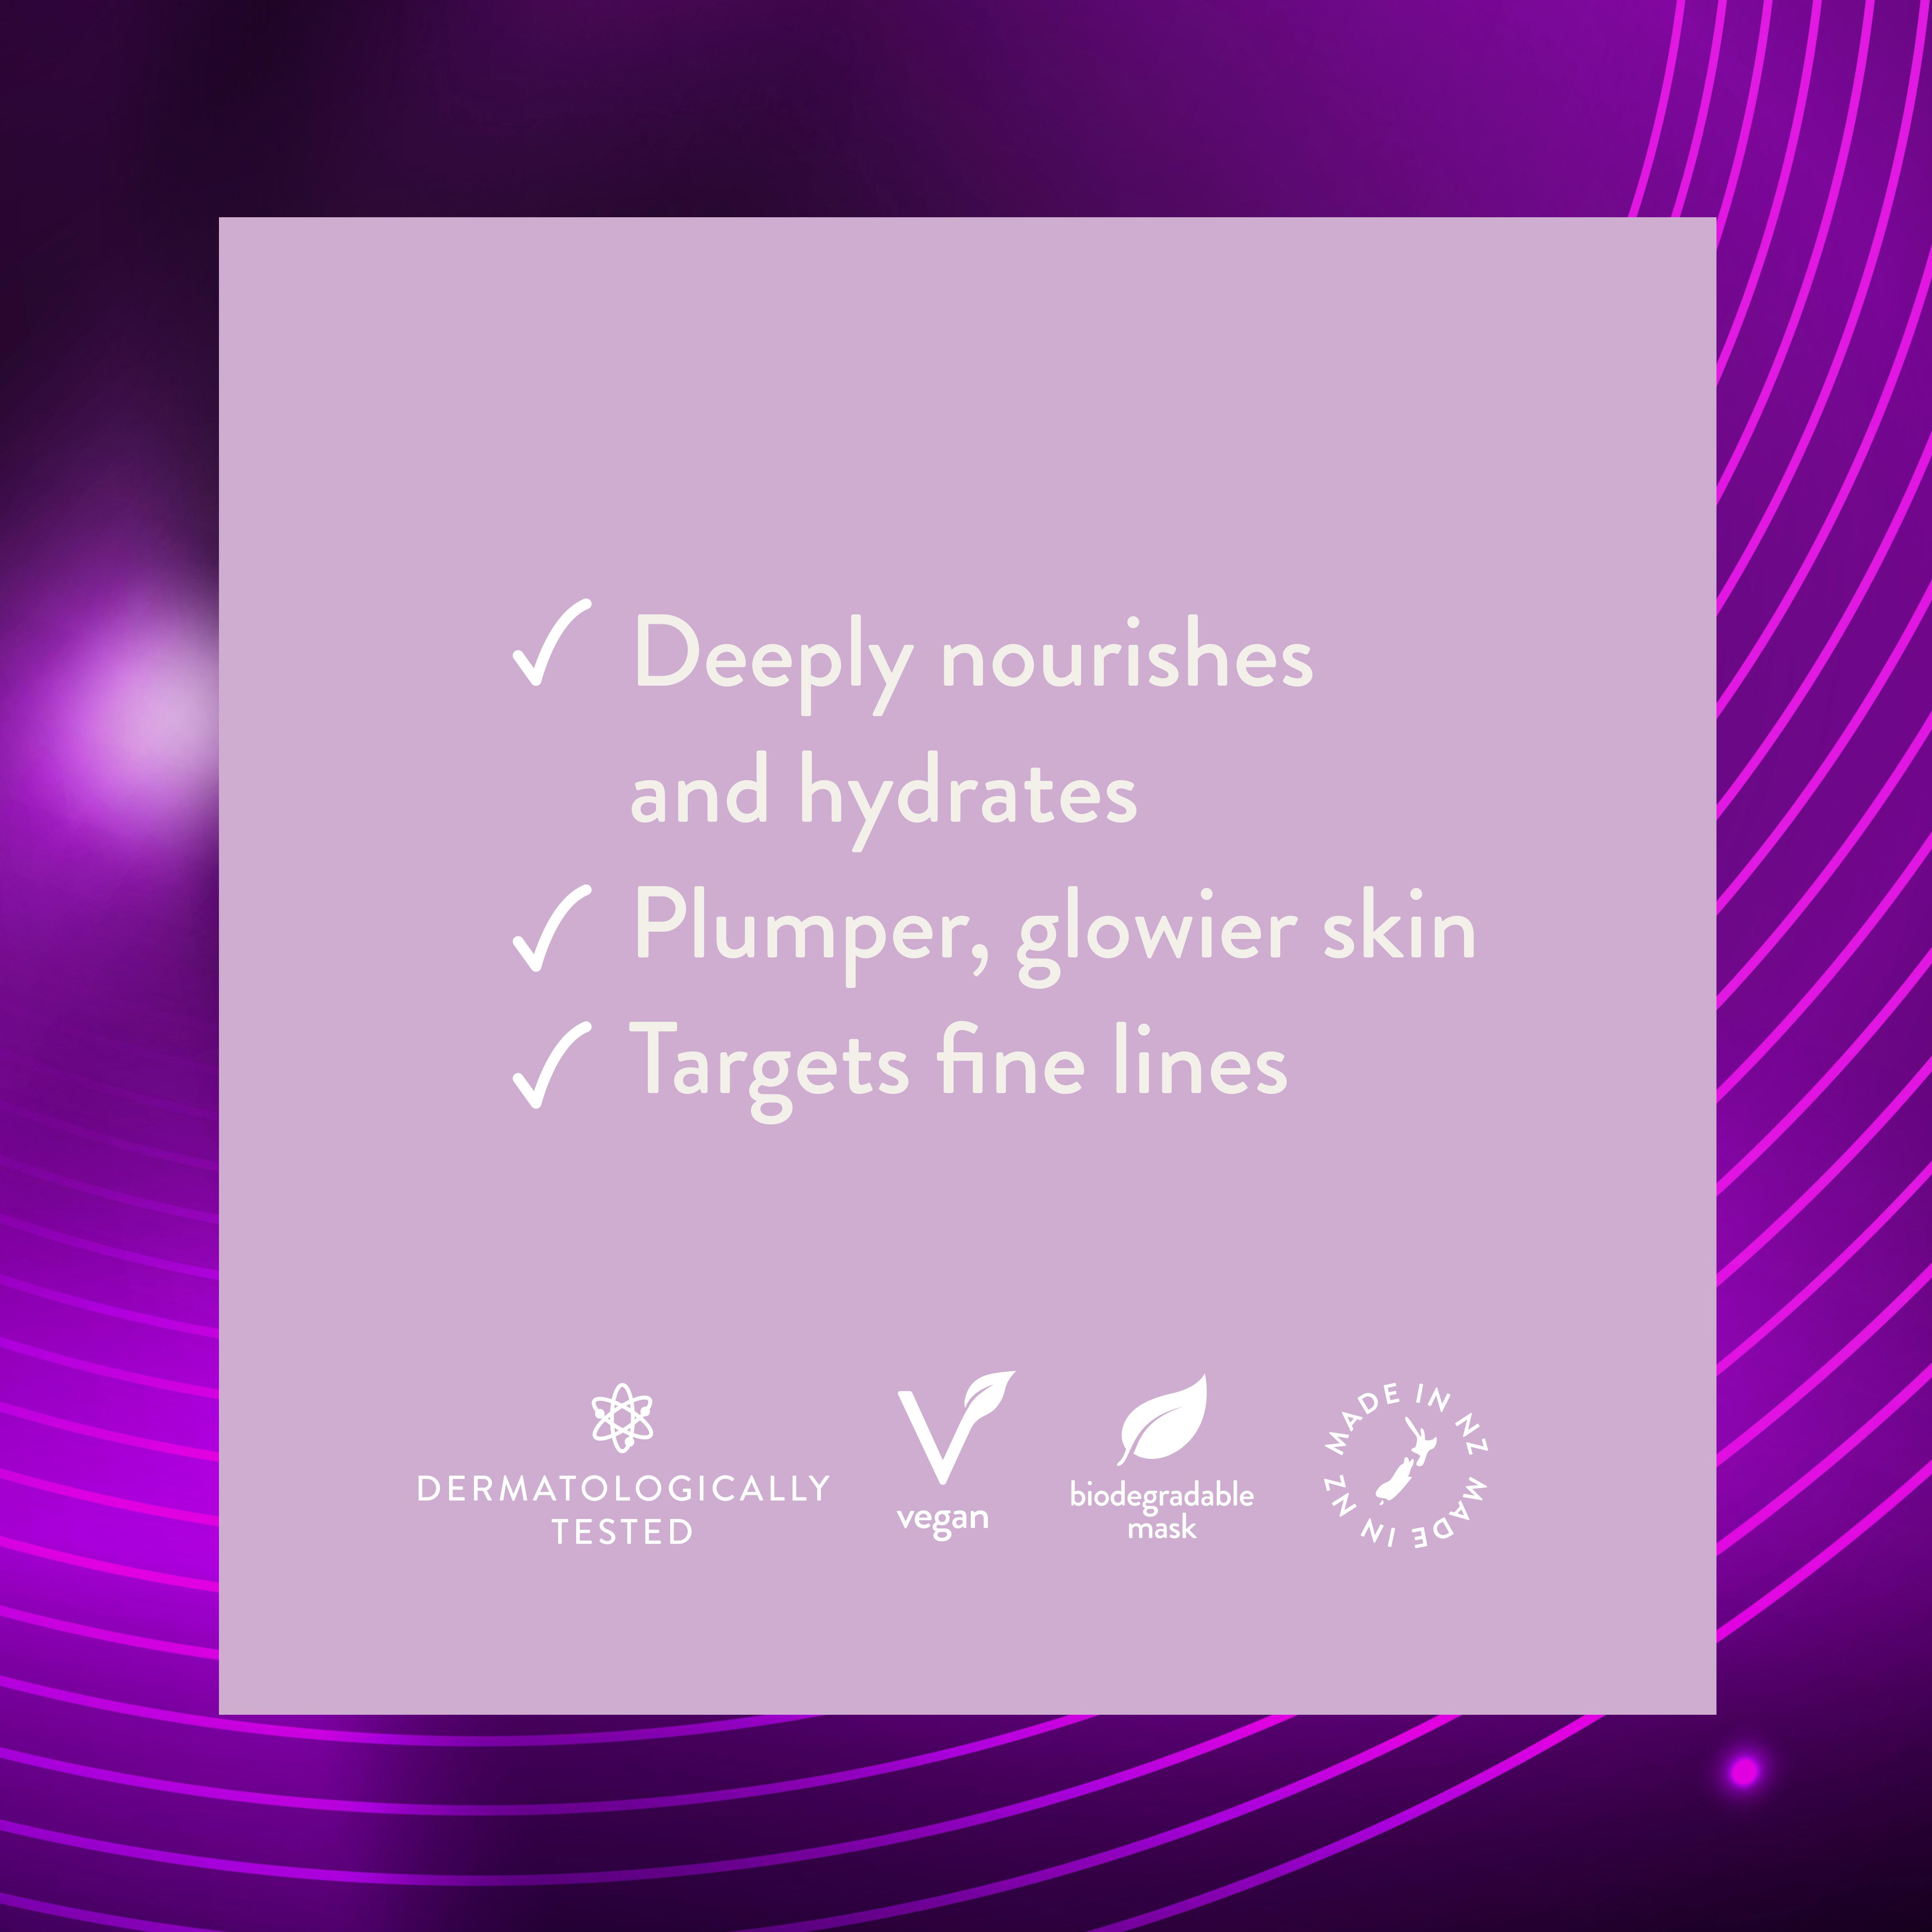 Pro-Collagen Plumping Face Mask